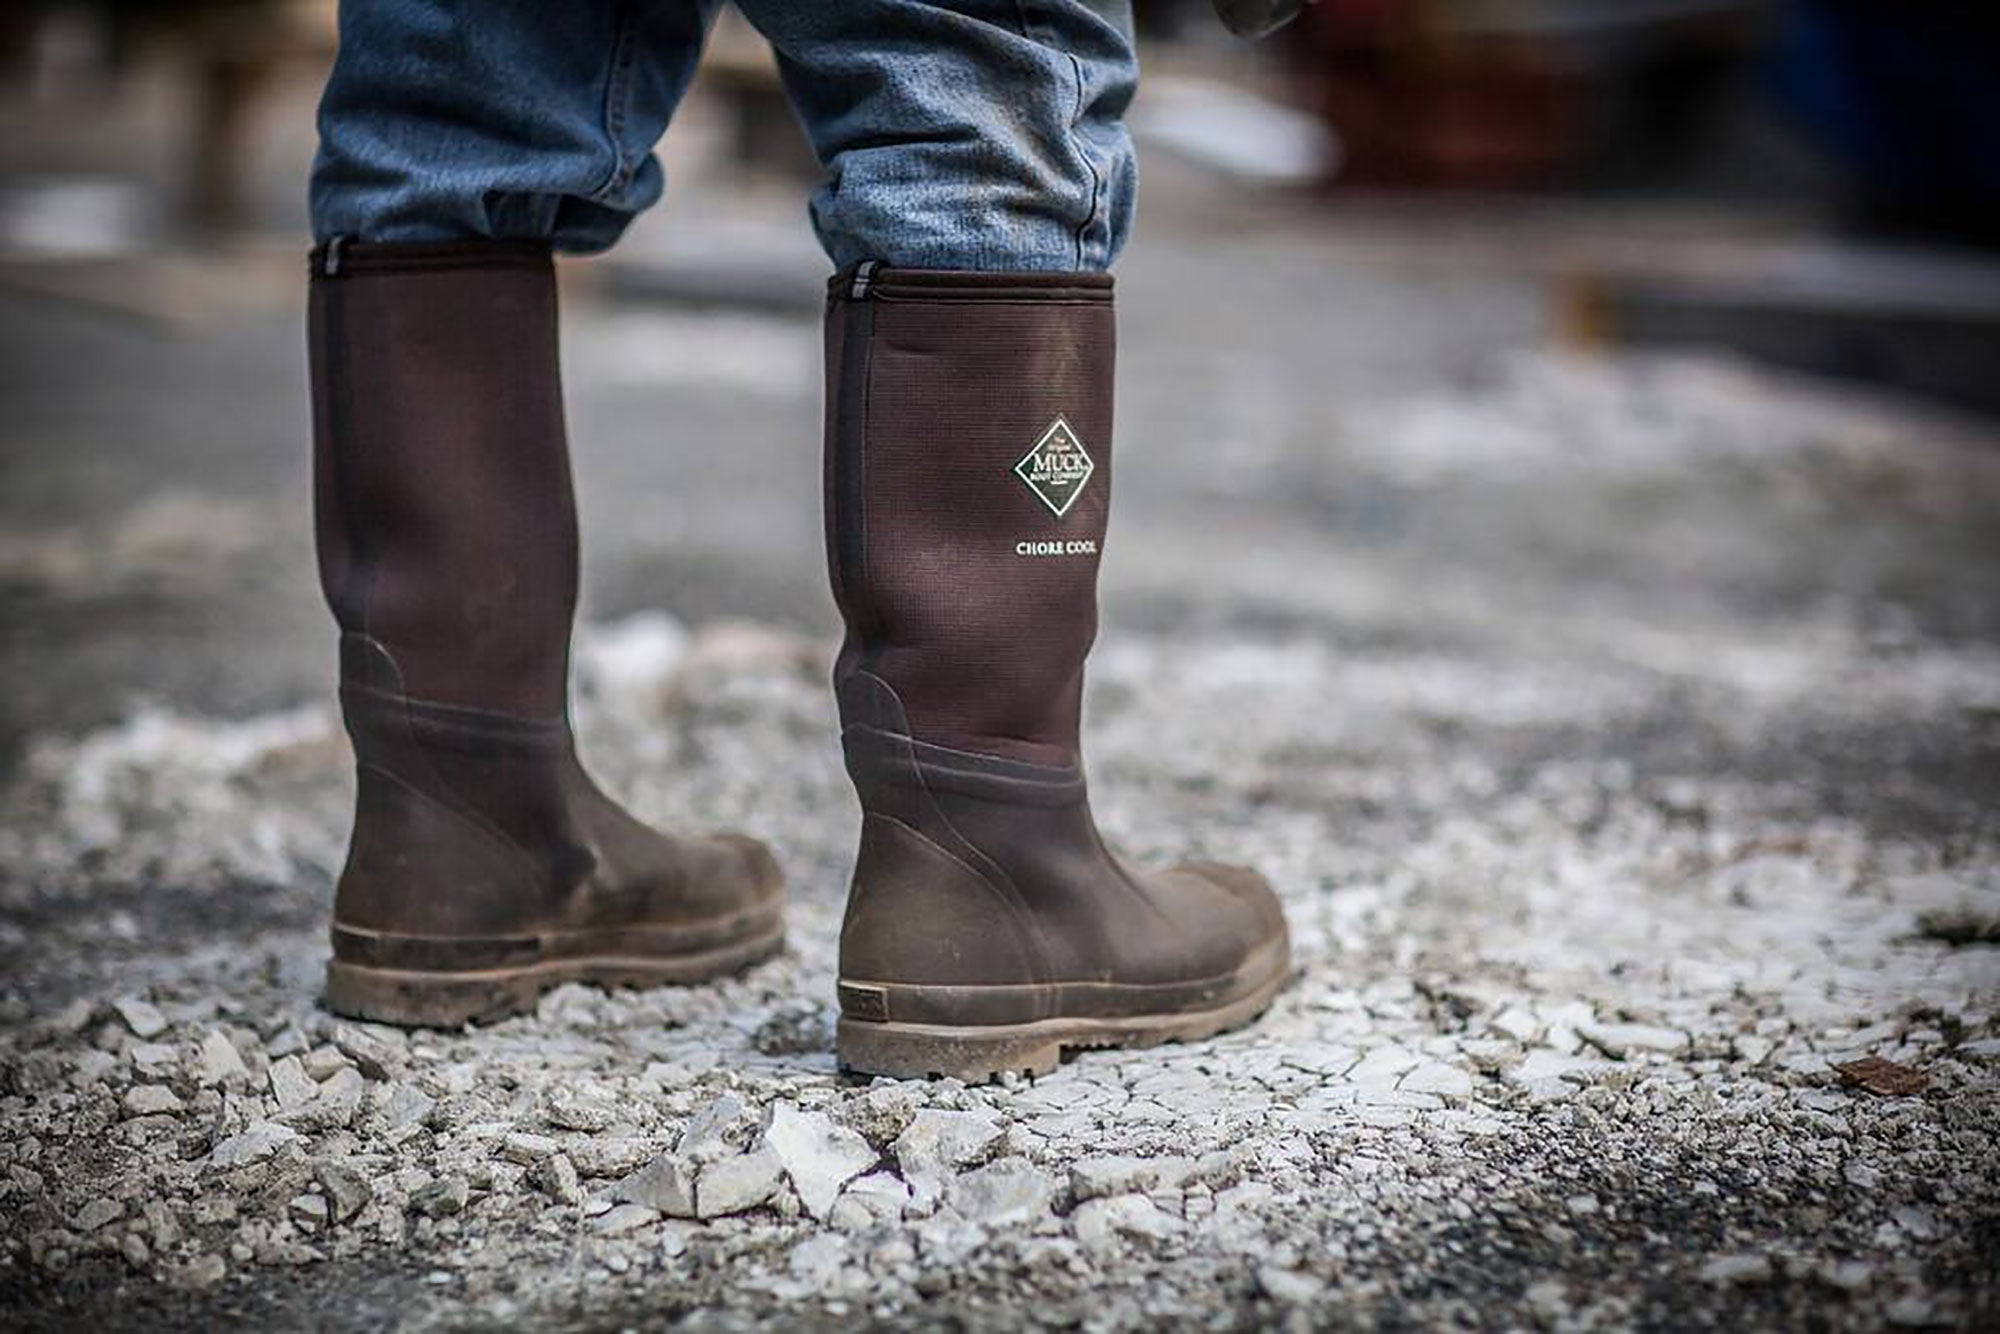 5 of the best pairs of Muck boots for men